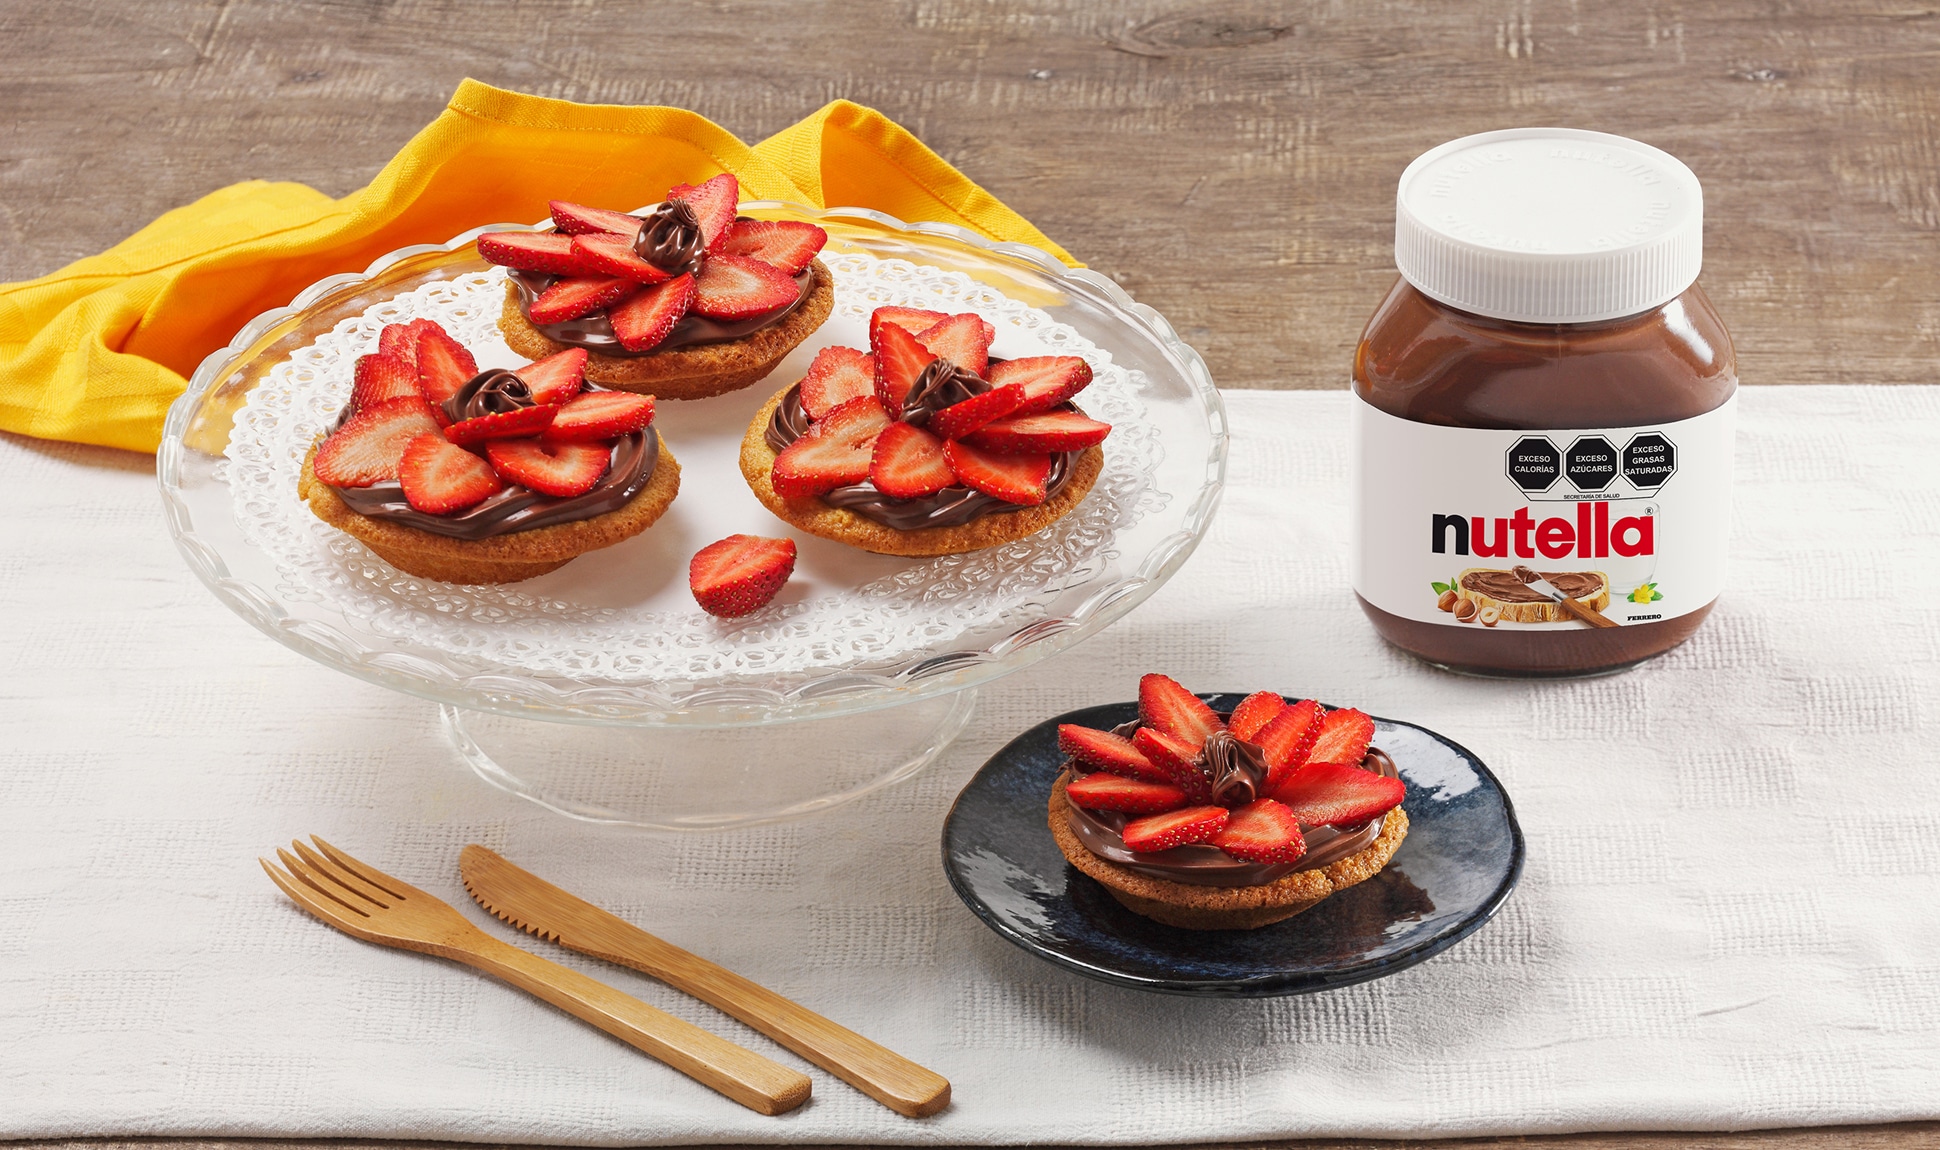 Mini tarts with Nutella® and strawberries